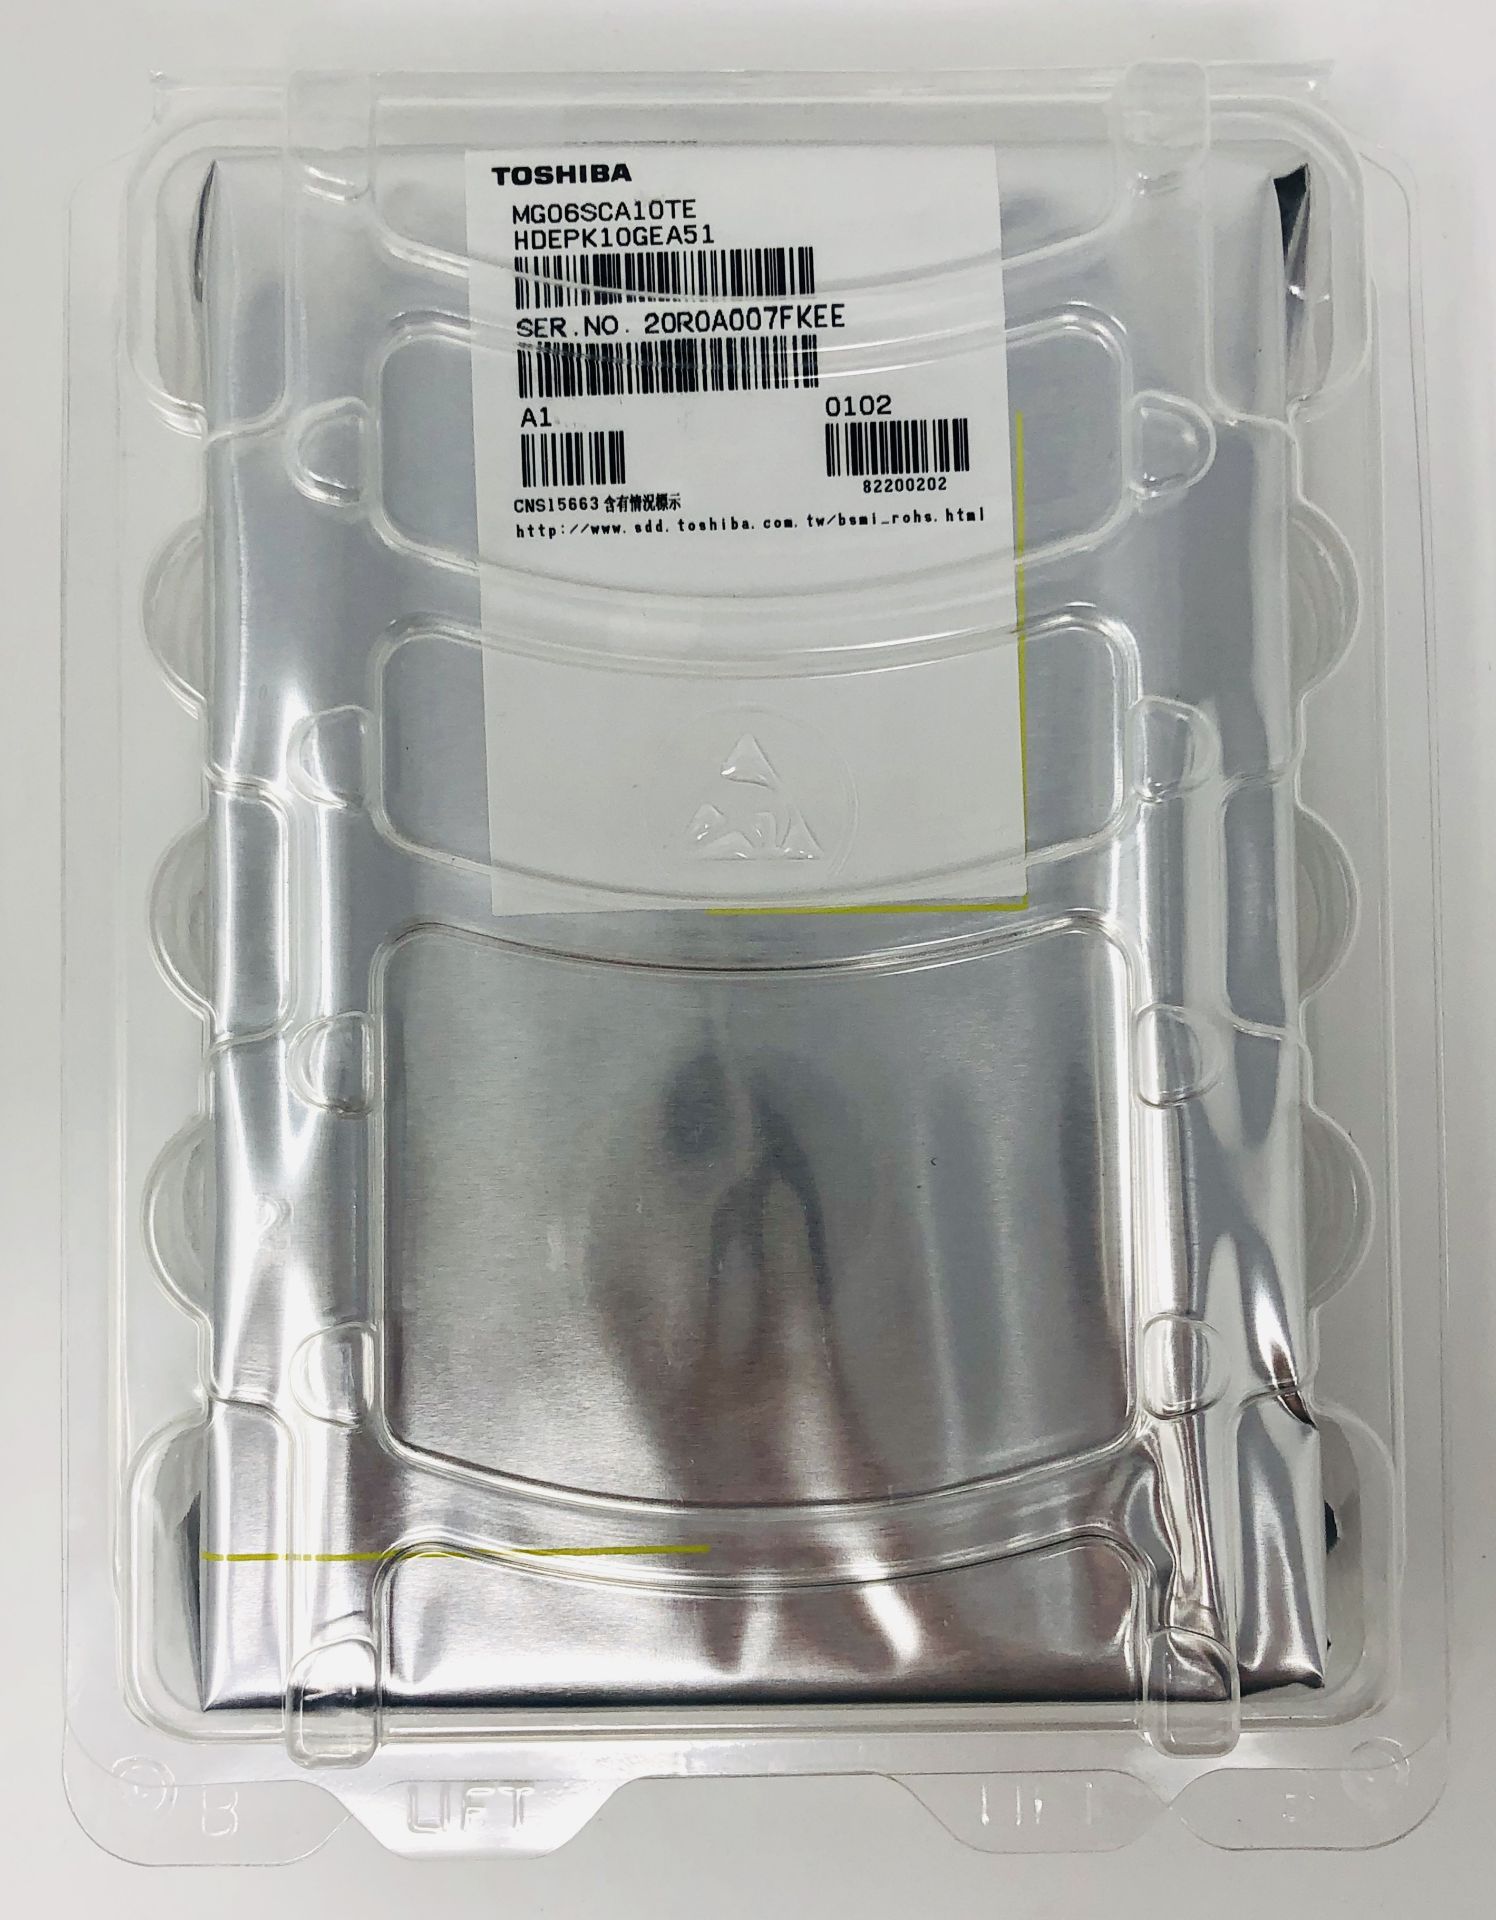 An as new Toshiba Enterprise MG06SCA10TE HDEPK10GEA51 10TB Hard Disk Drive (Packaging sealed).